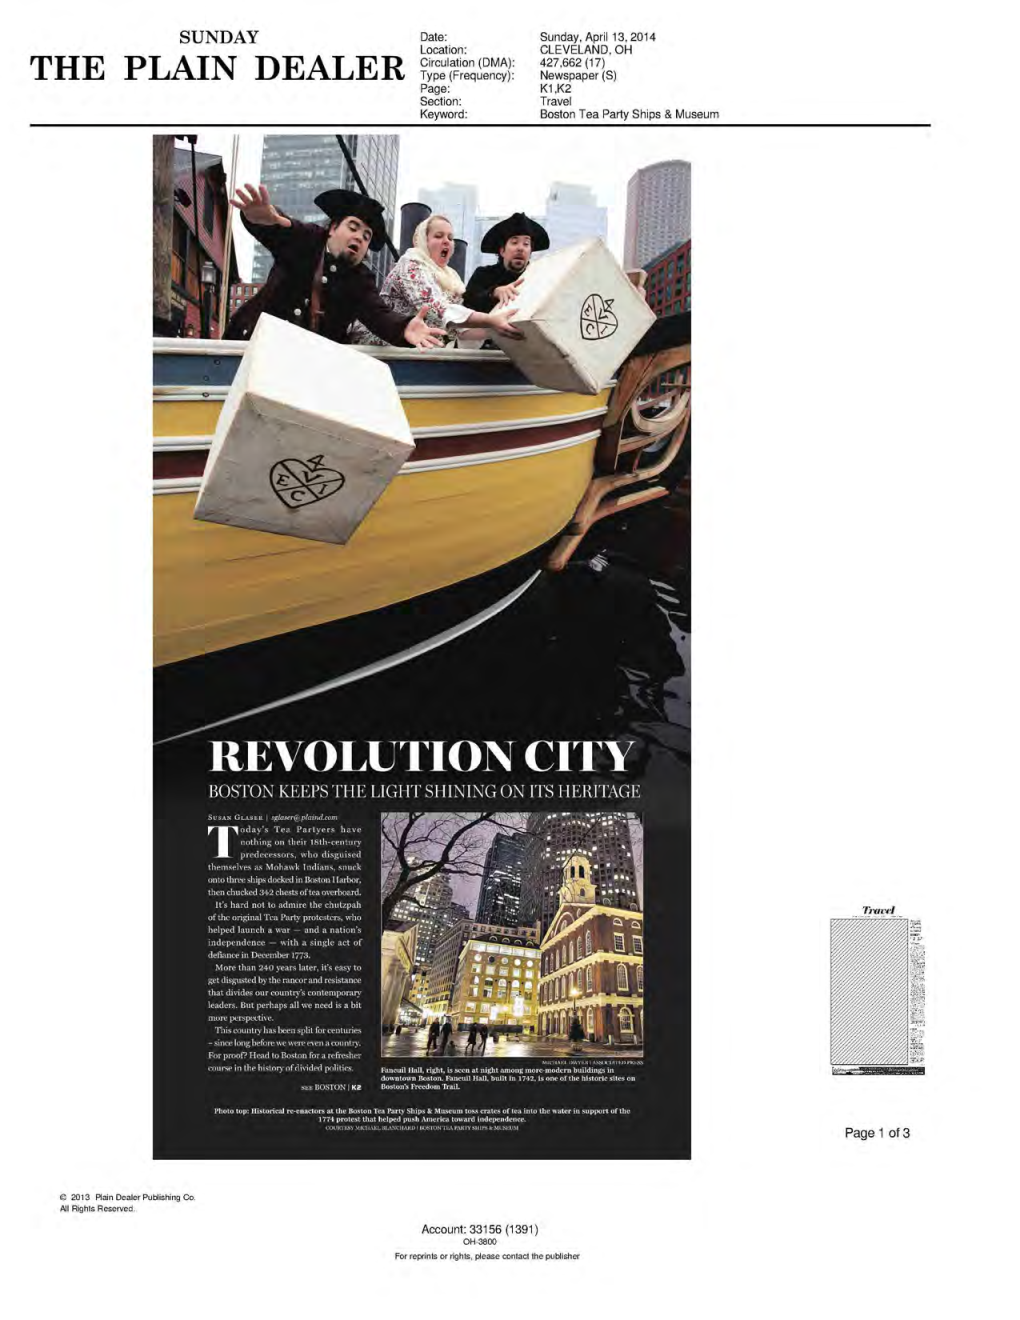 THE PLAIN DEALER Type (Frequency): Newspaper (S) Page: K1,K2 Section: Travel Keyword: Boston Tea Party Ships & Museum